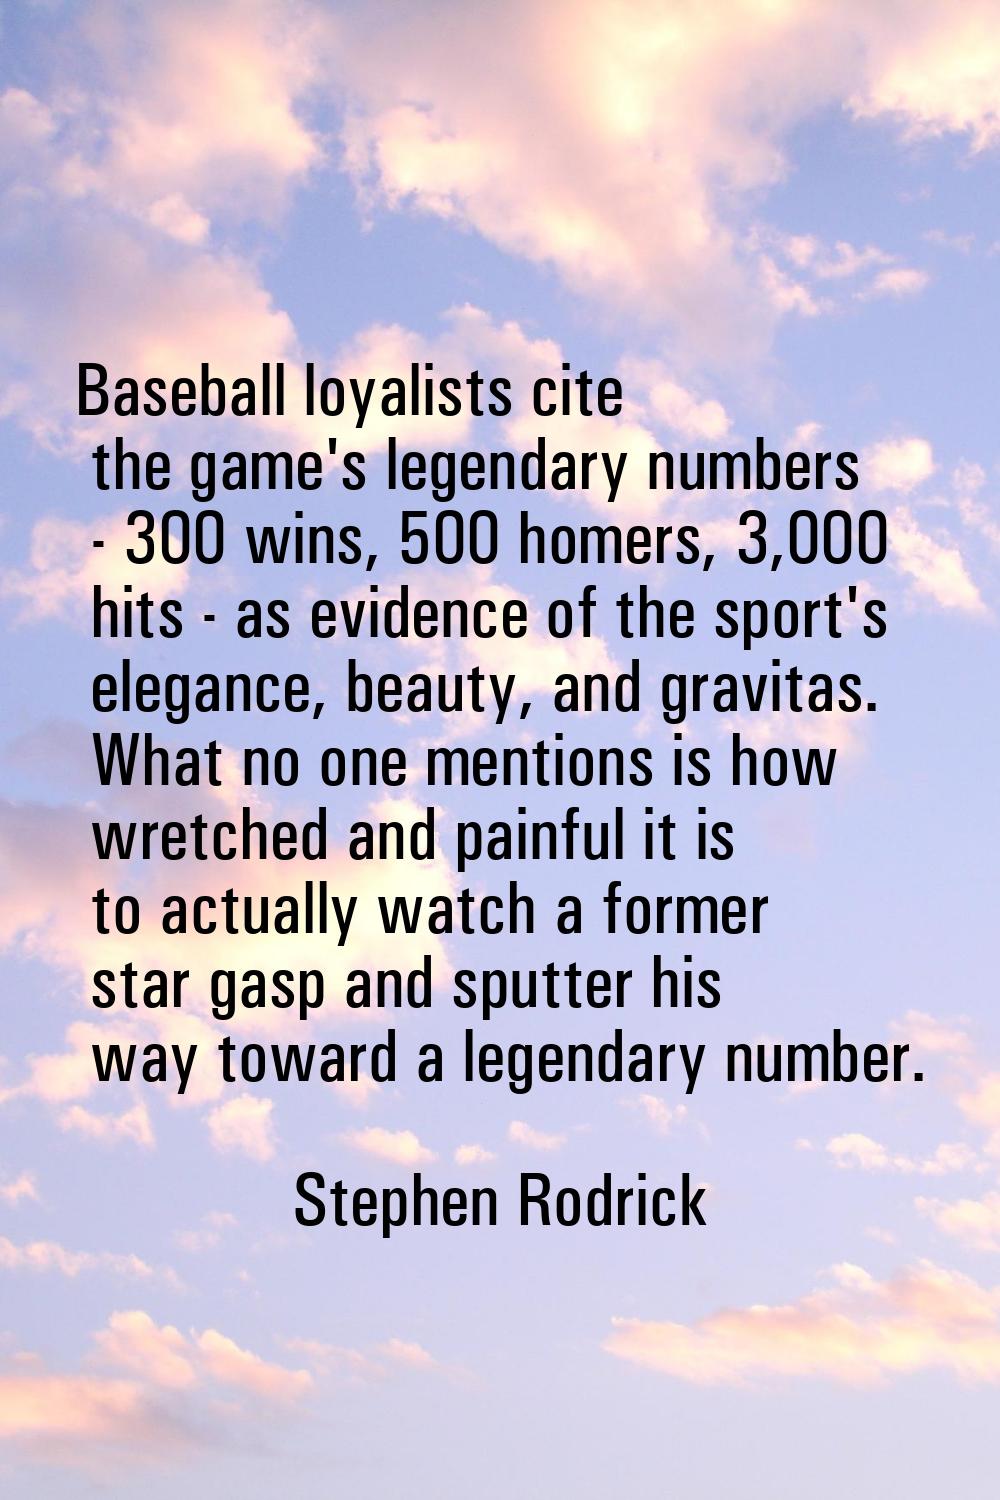 Baseball loyalists cite the game's legendary numbers - 300 wins, 500 homers, 3,000 hits - as eviden